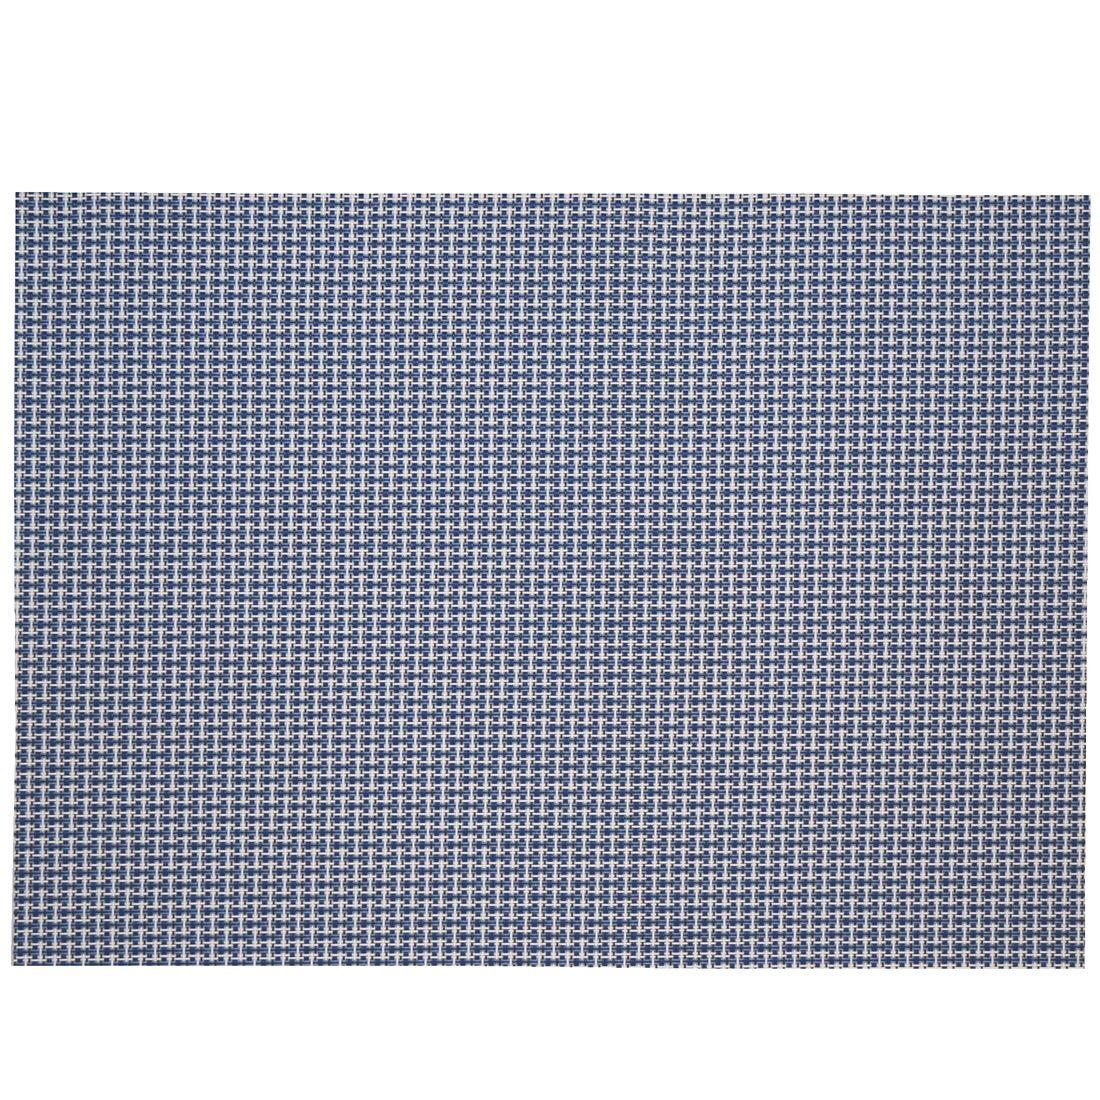 Rectangular Blue and White Logo - Rectangle Placemats: Blue White Wipe Clean Rectangle-Shaped Placemat ...